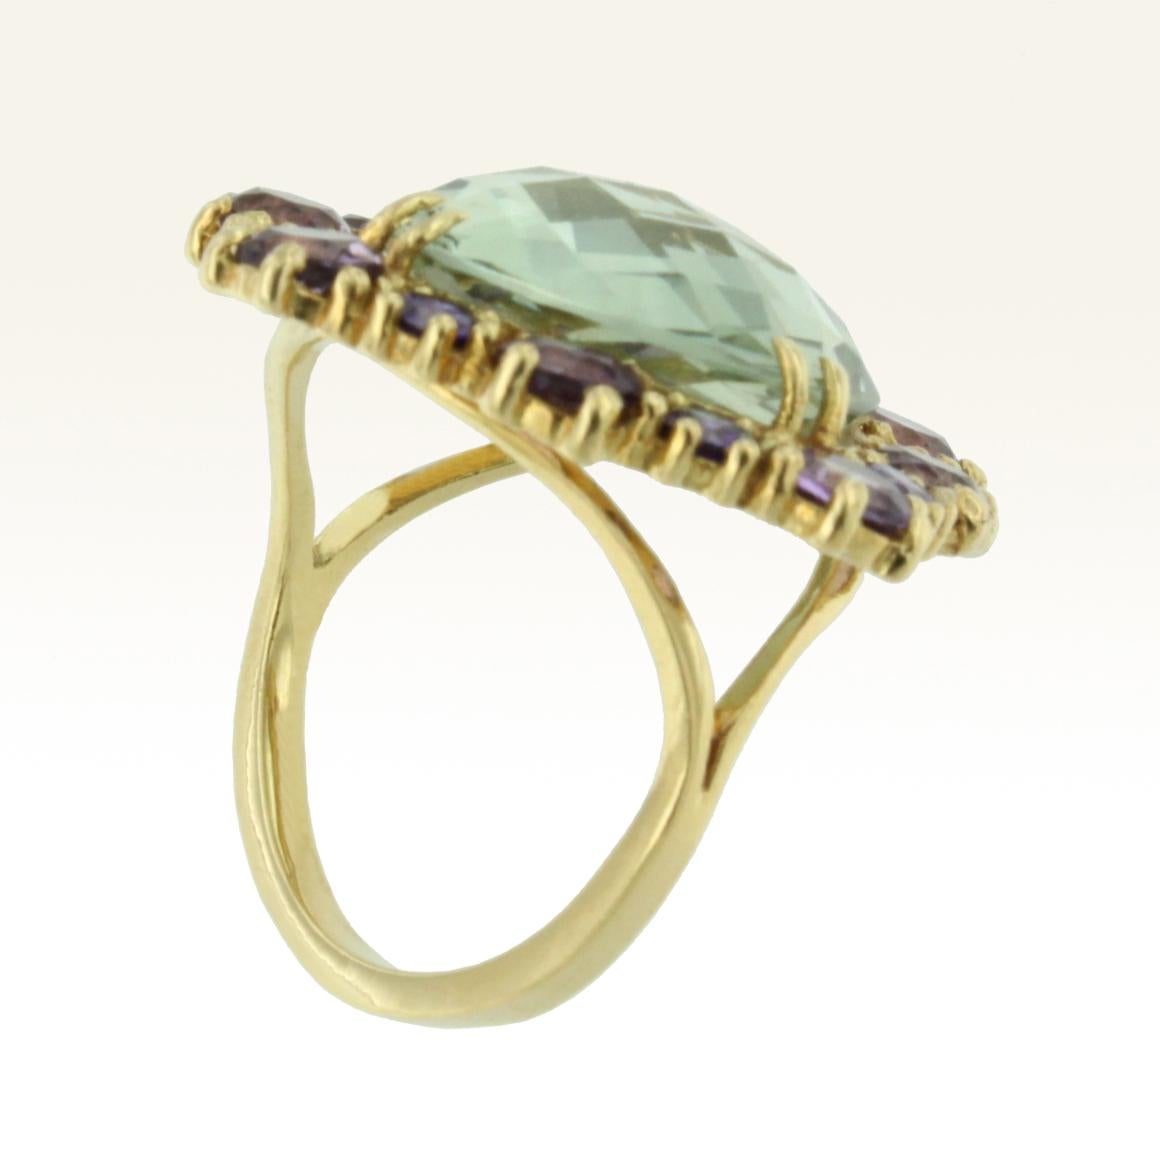 Modern 18 Karat Yellow Gold with Amethyst and Green Amethyst Ring